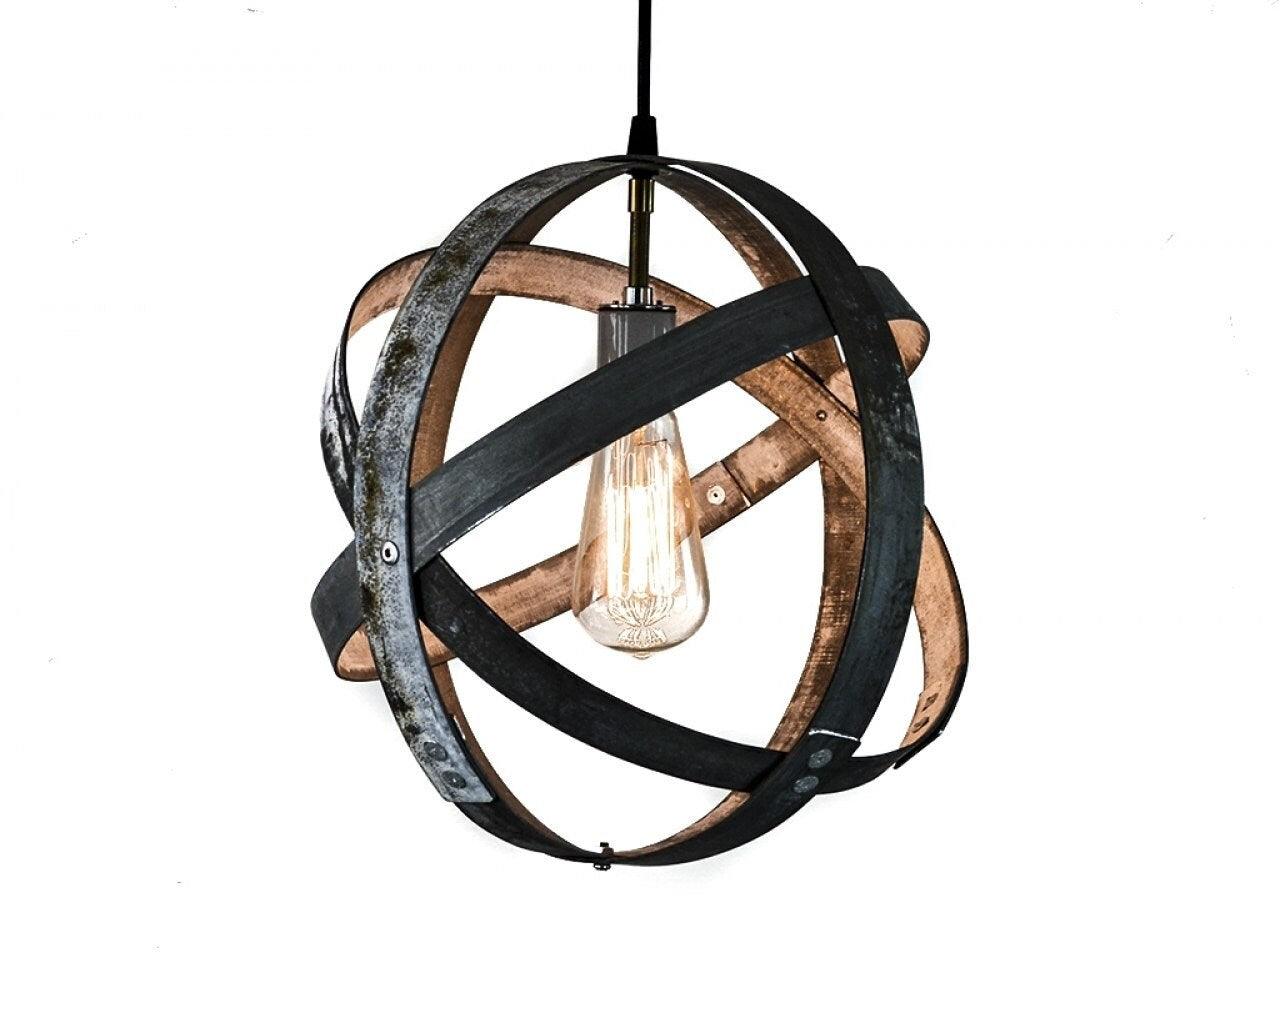 Triple Globe Barrel Ring Chandelier - Apex - Made from retired California wine barrel rings. 100% Recycled!